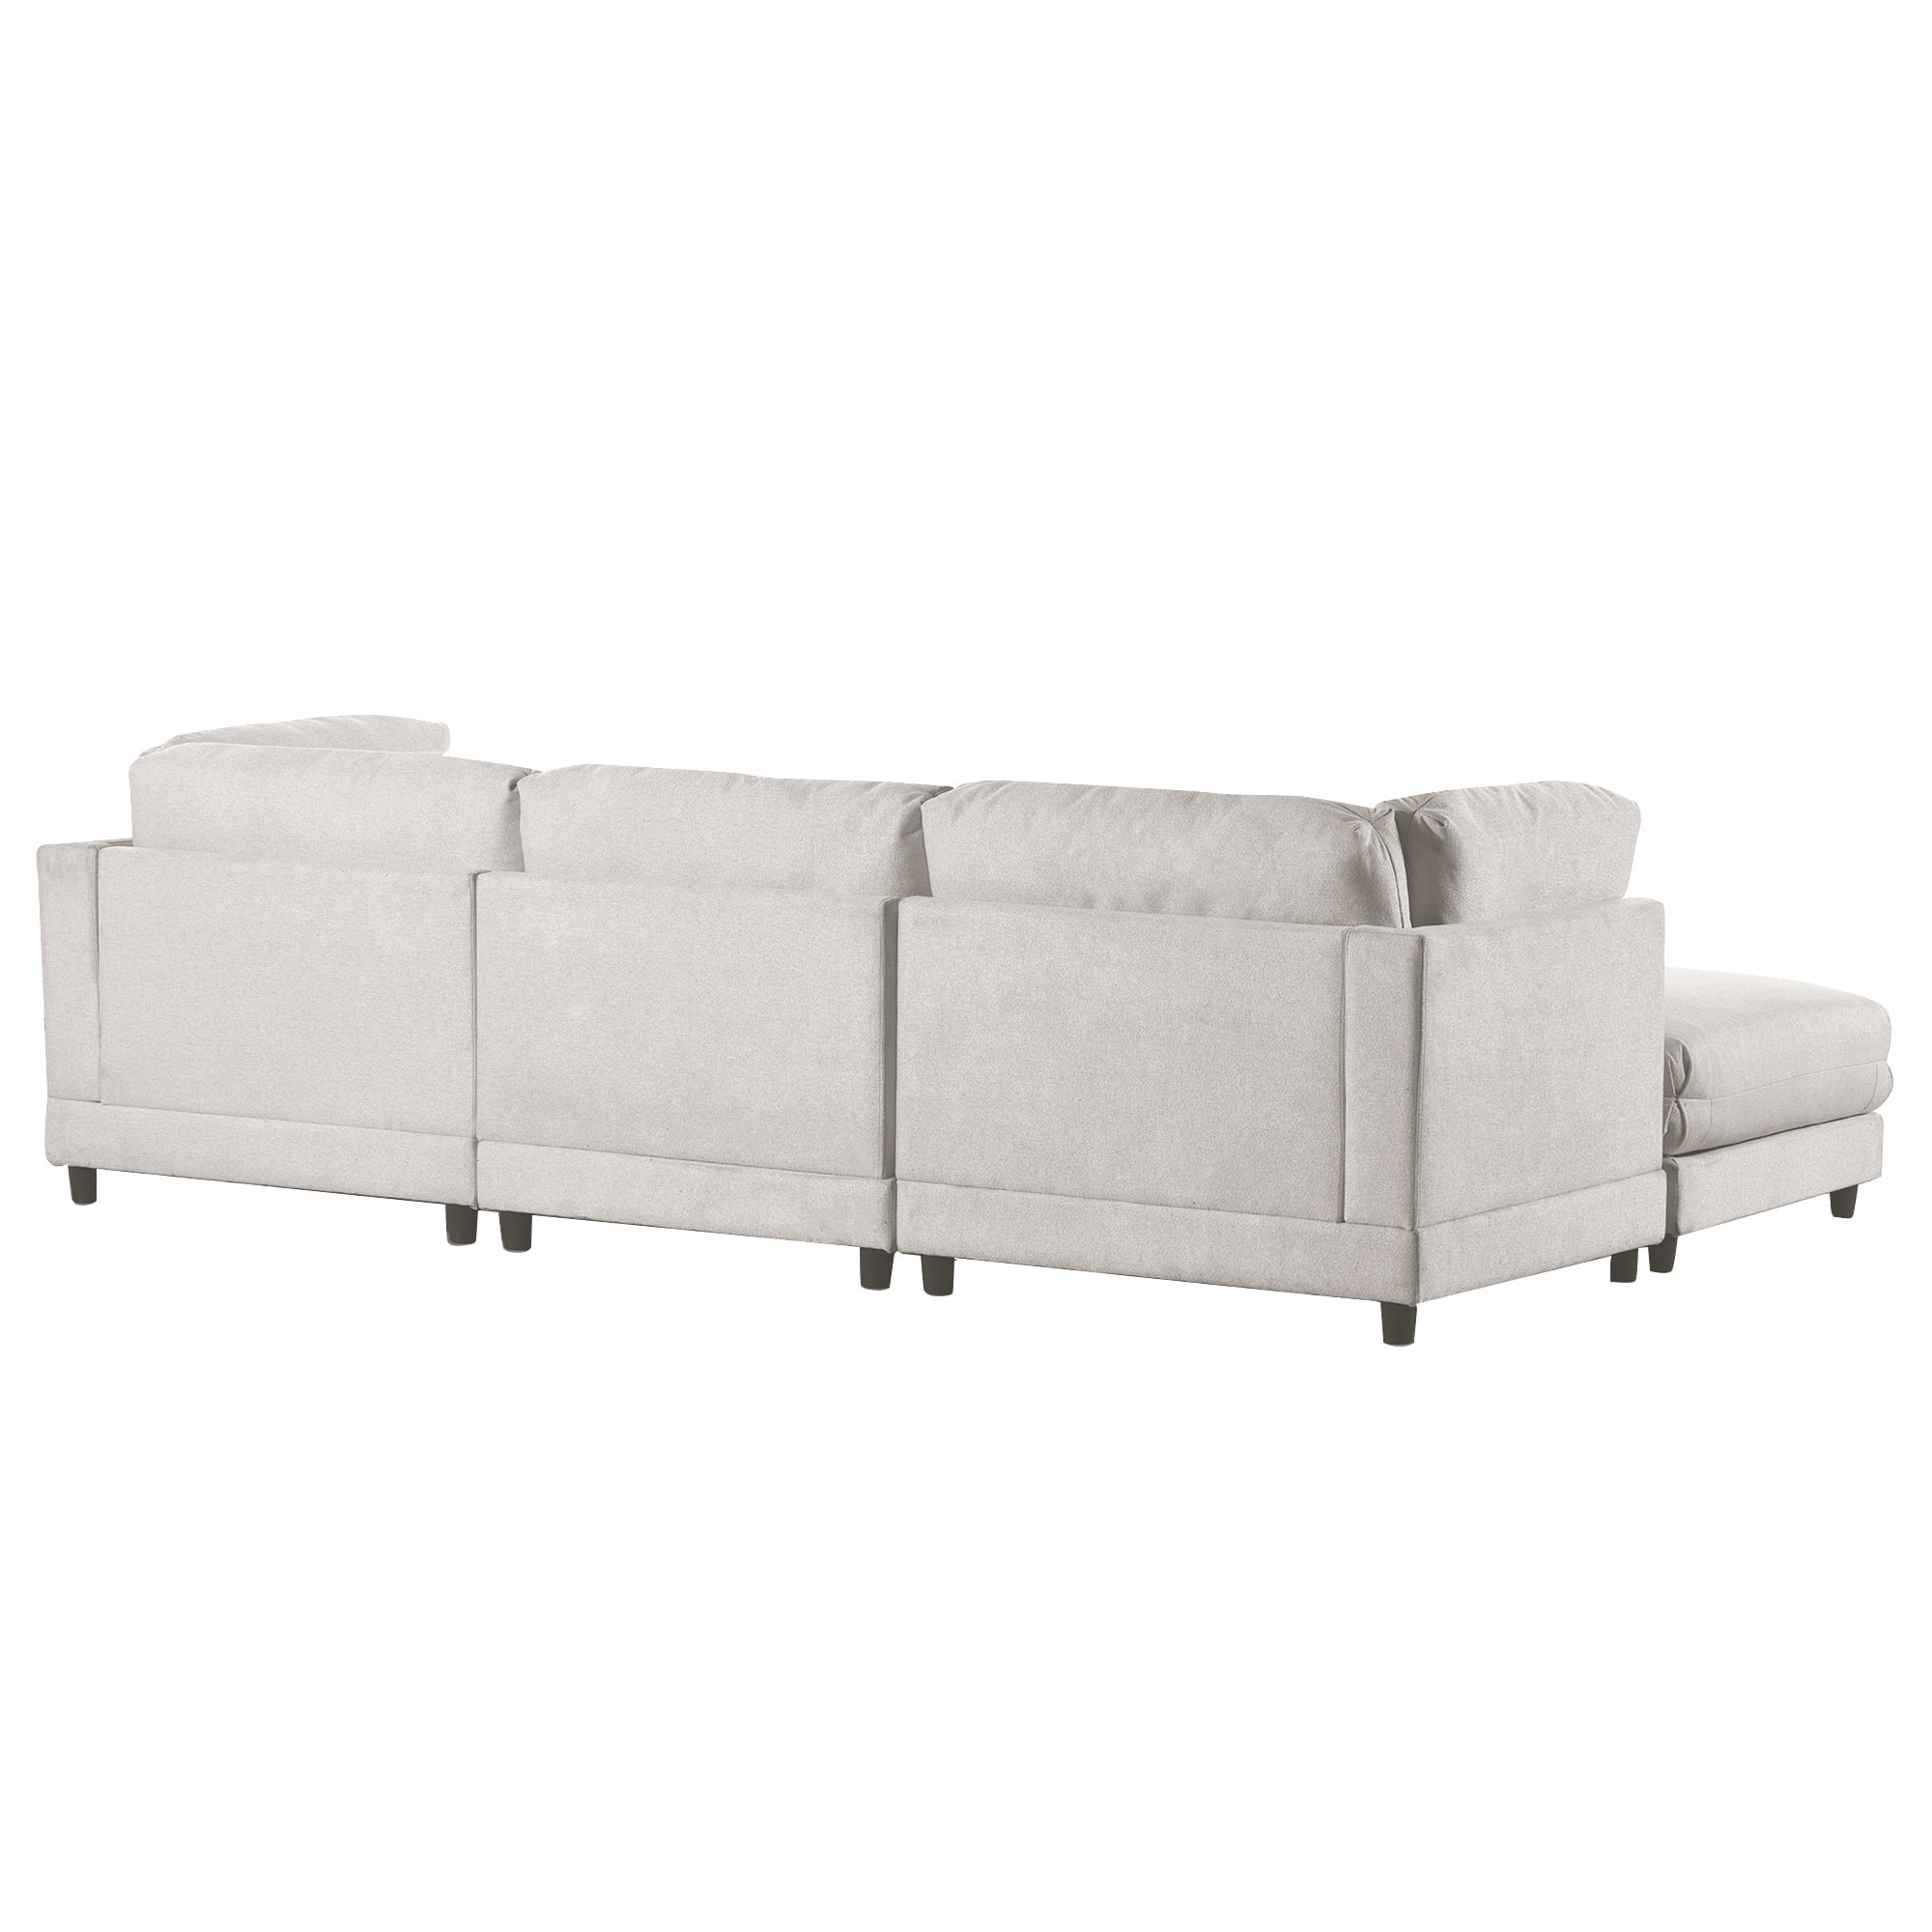 2 Pieces L Shaped Sofa With Removable Ottomans And Comfortable Waist Pillows - WY000328AAA